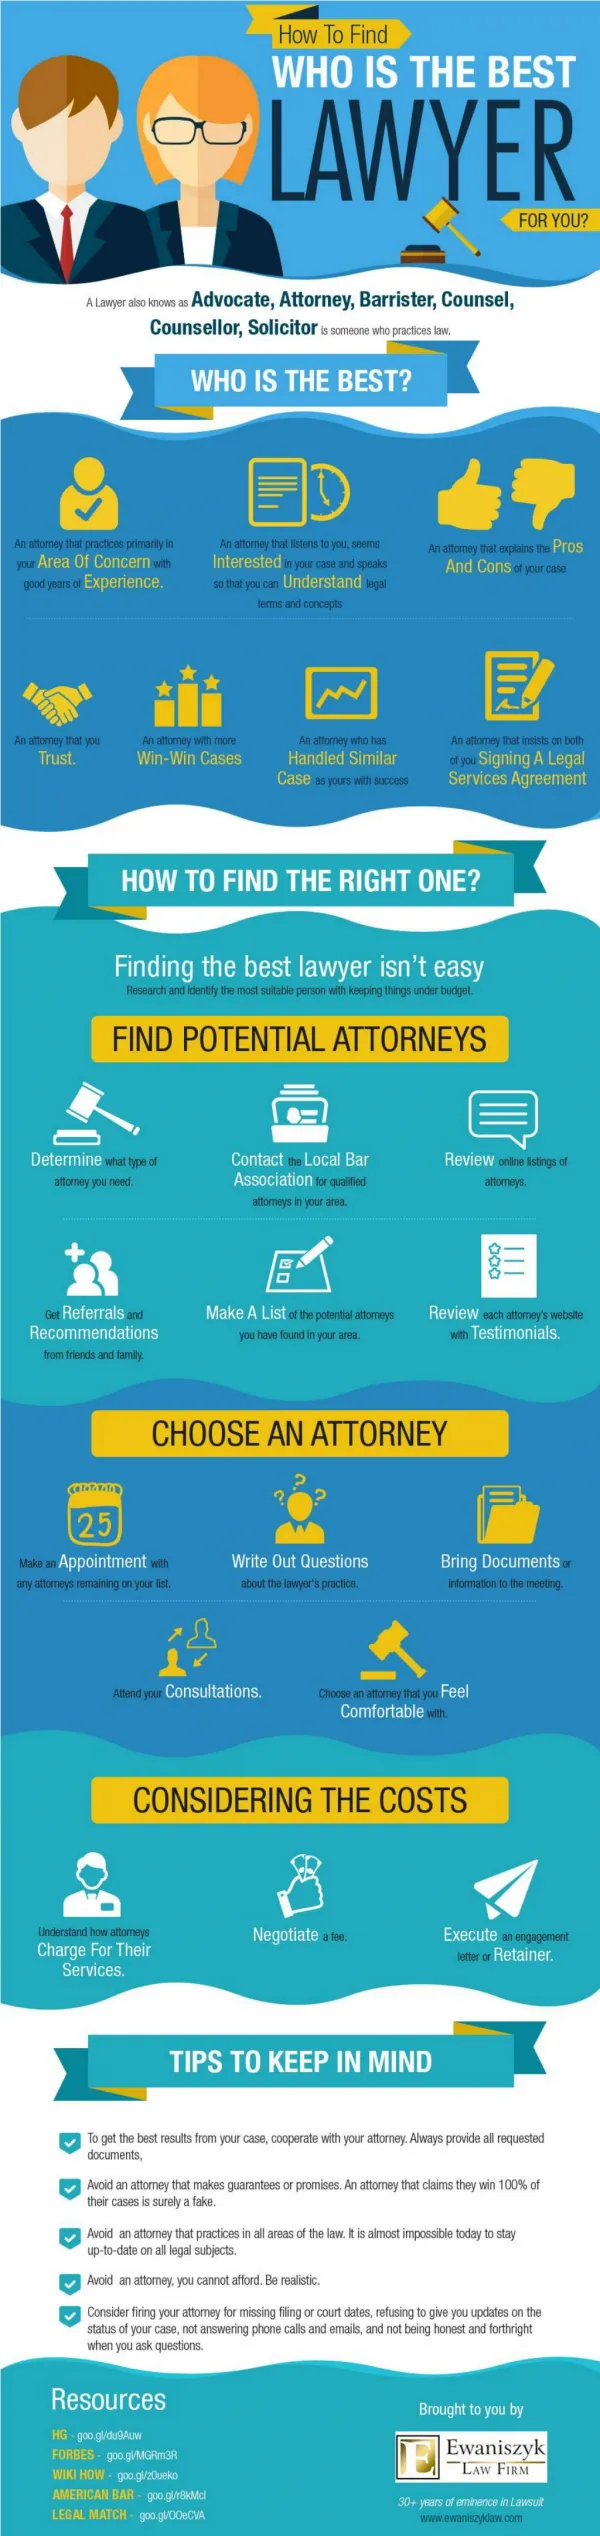 How to Find a Good Criminal Defense Lawyer